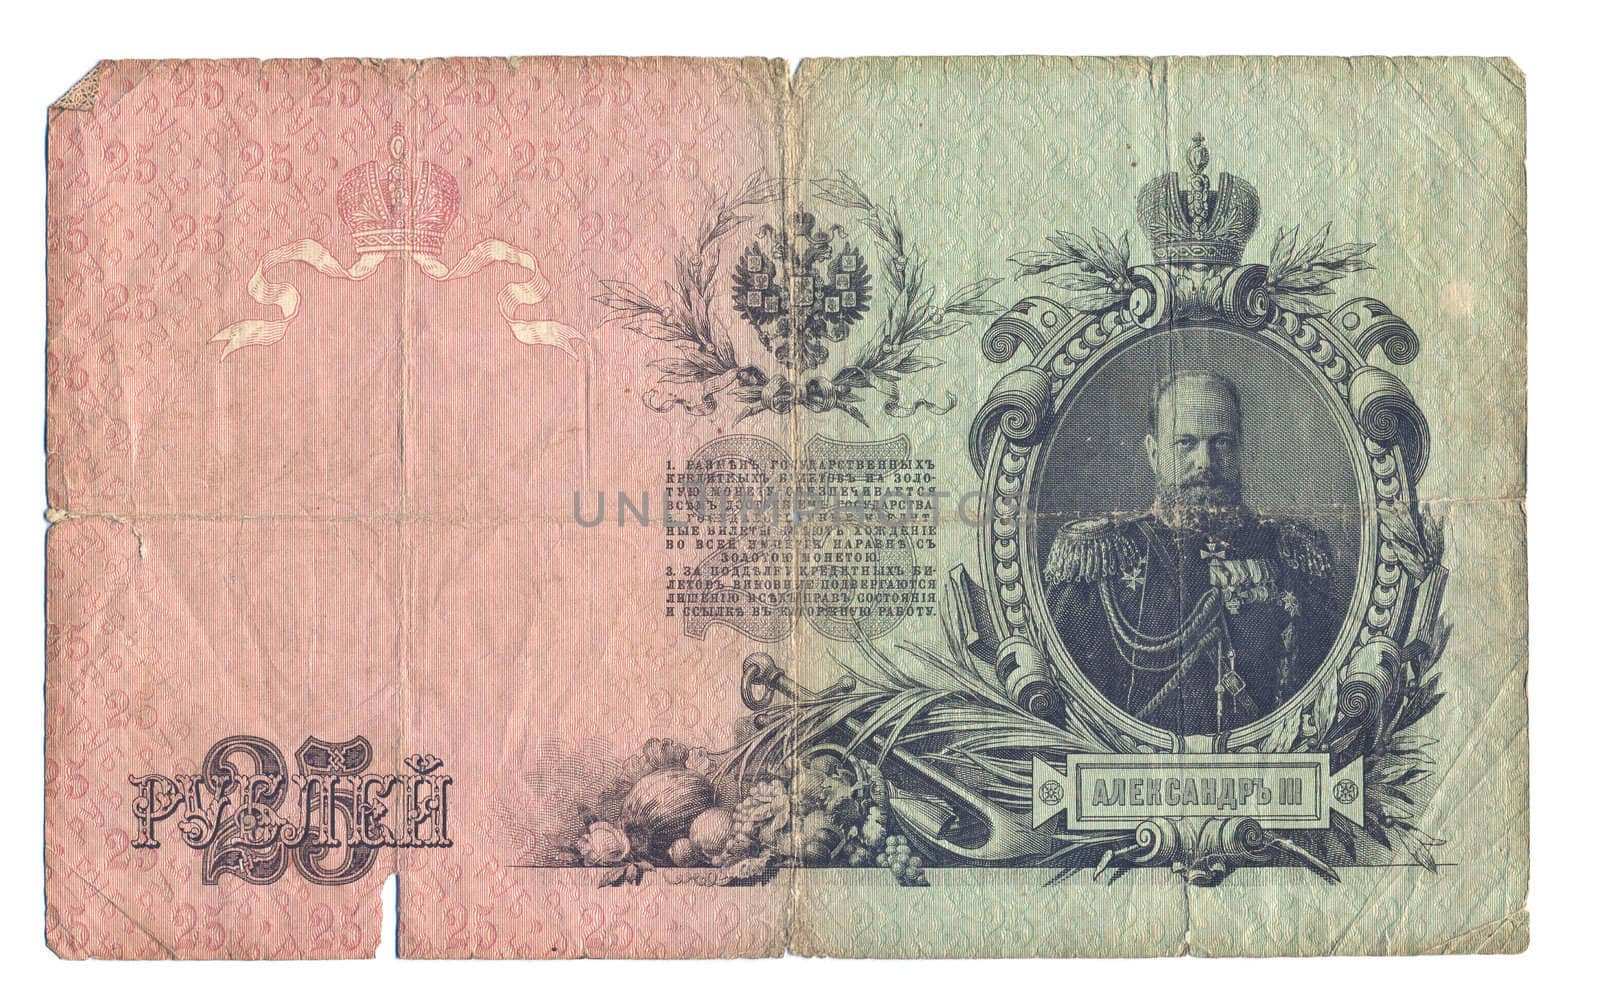 The back of the scanned old monetary denomination by eglazov